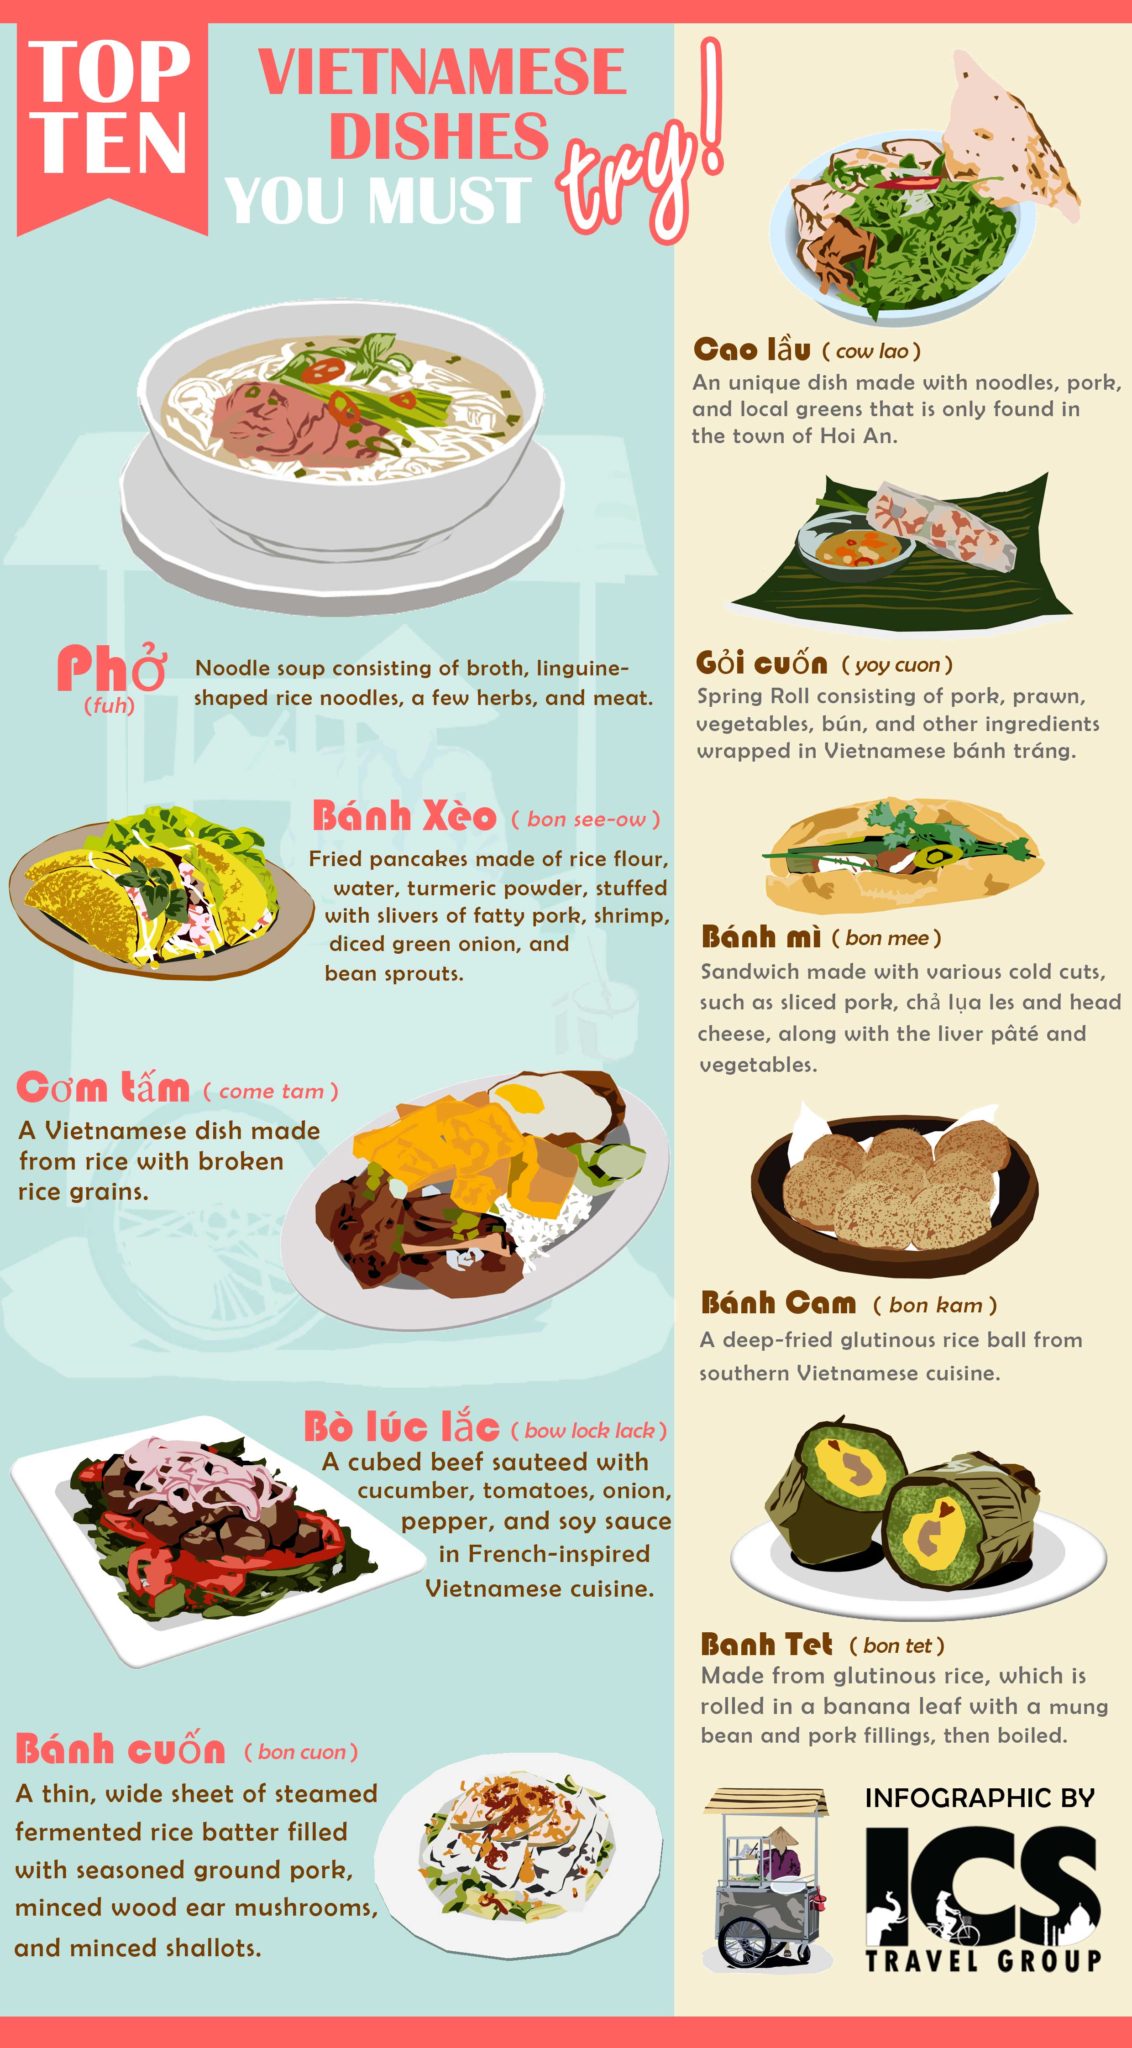 etc Foresee overskydende Top 10 Vietnamese dishes - FlyCruiseStay.comFlyCruiseStay.com